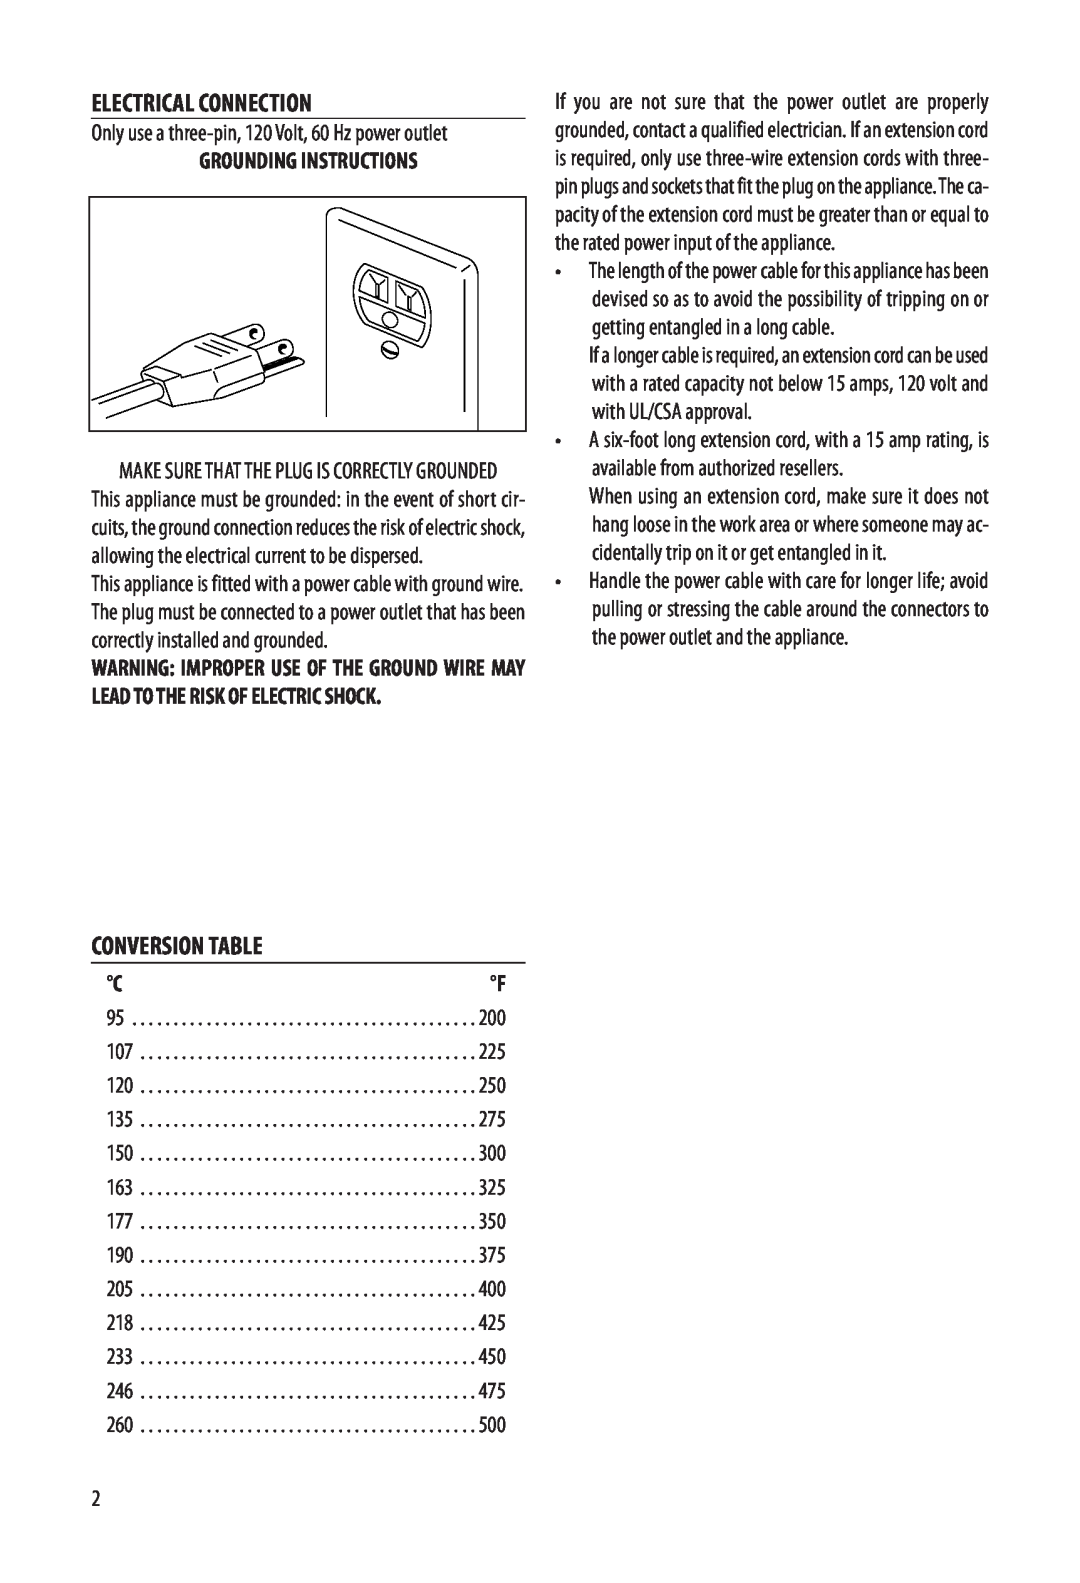 DeLonghi EO1270 1B specifications Electrical Connection, Conversion Table, Grounding Instructions 